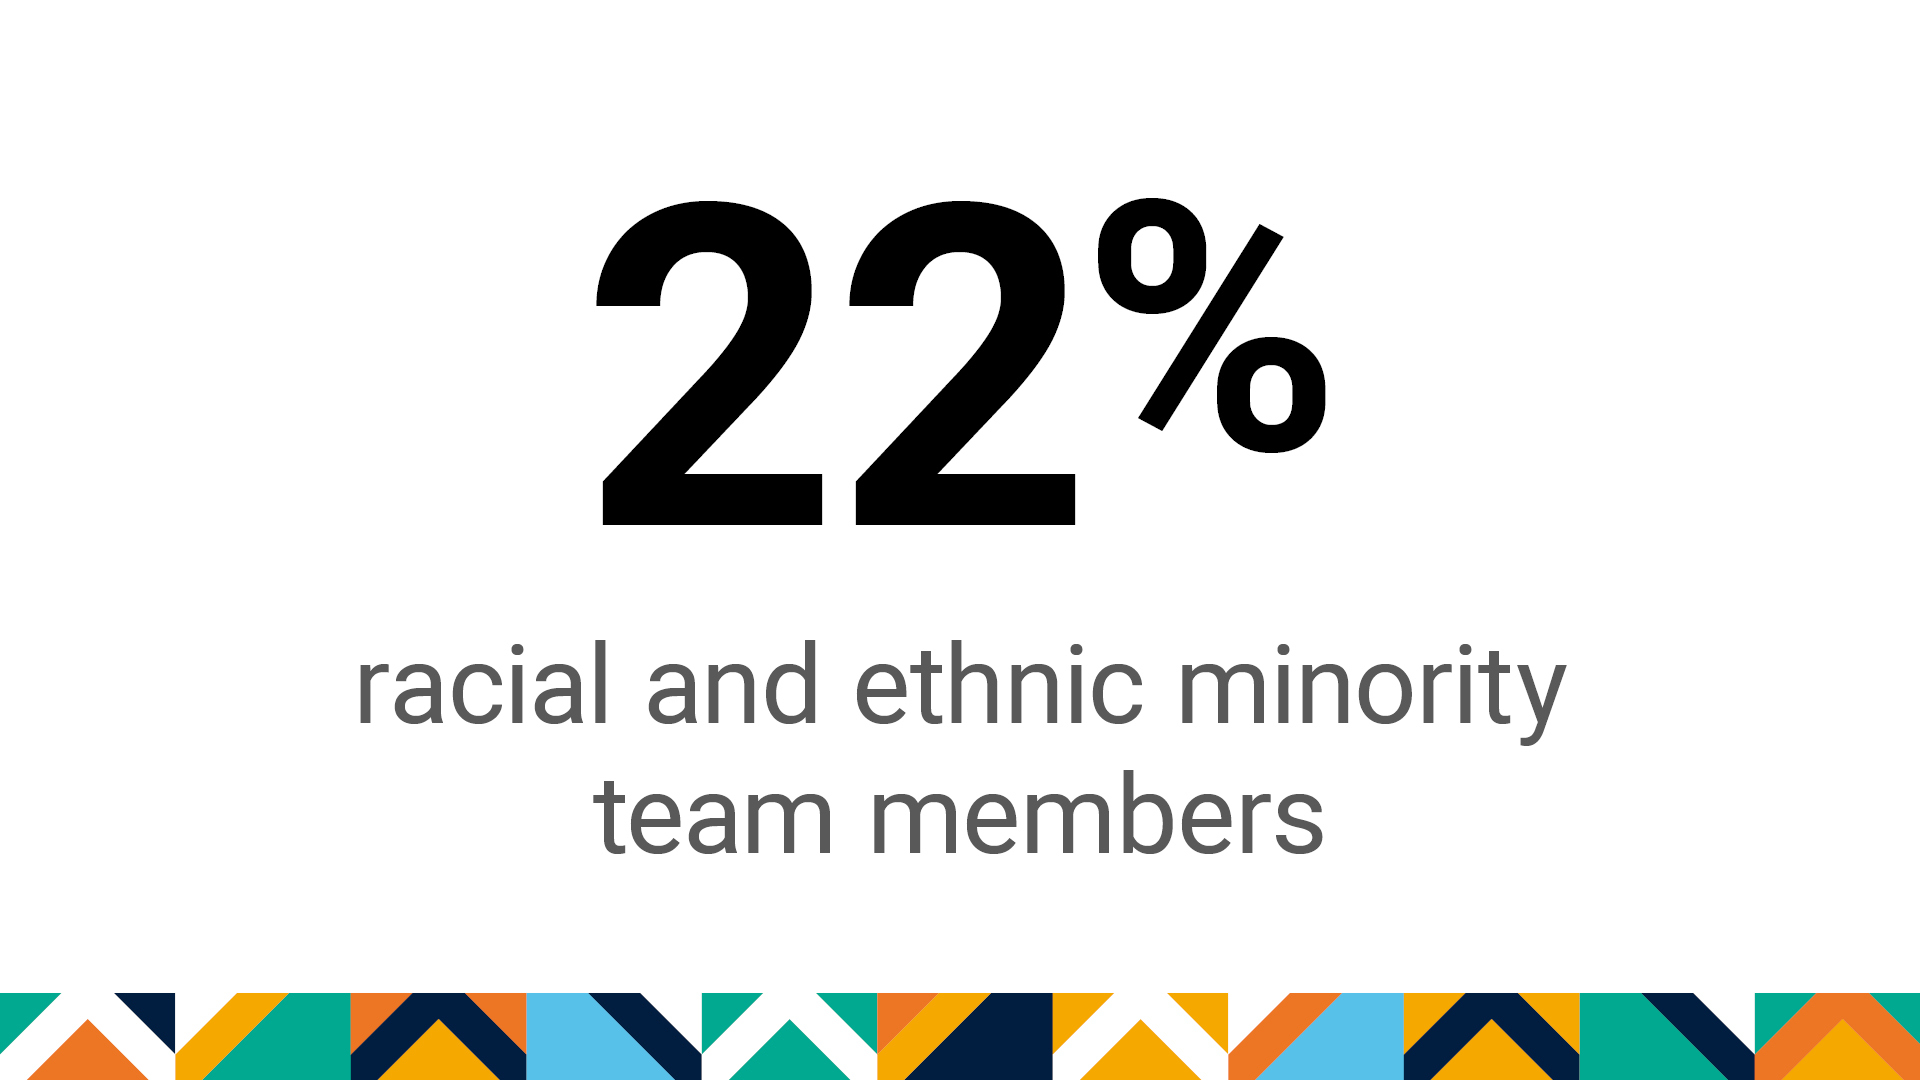 Representation of racial and ethnic minority team members in the firm totaled 20% in FY20 and 22% as of FY22. 